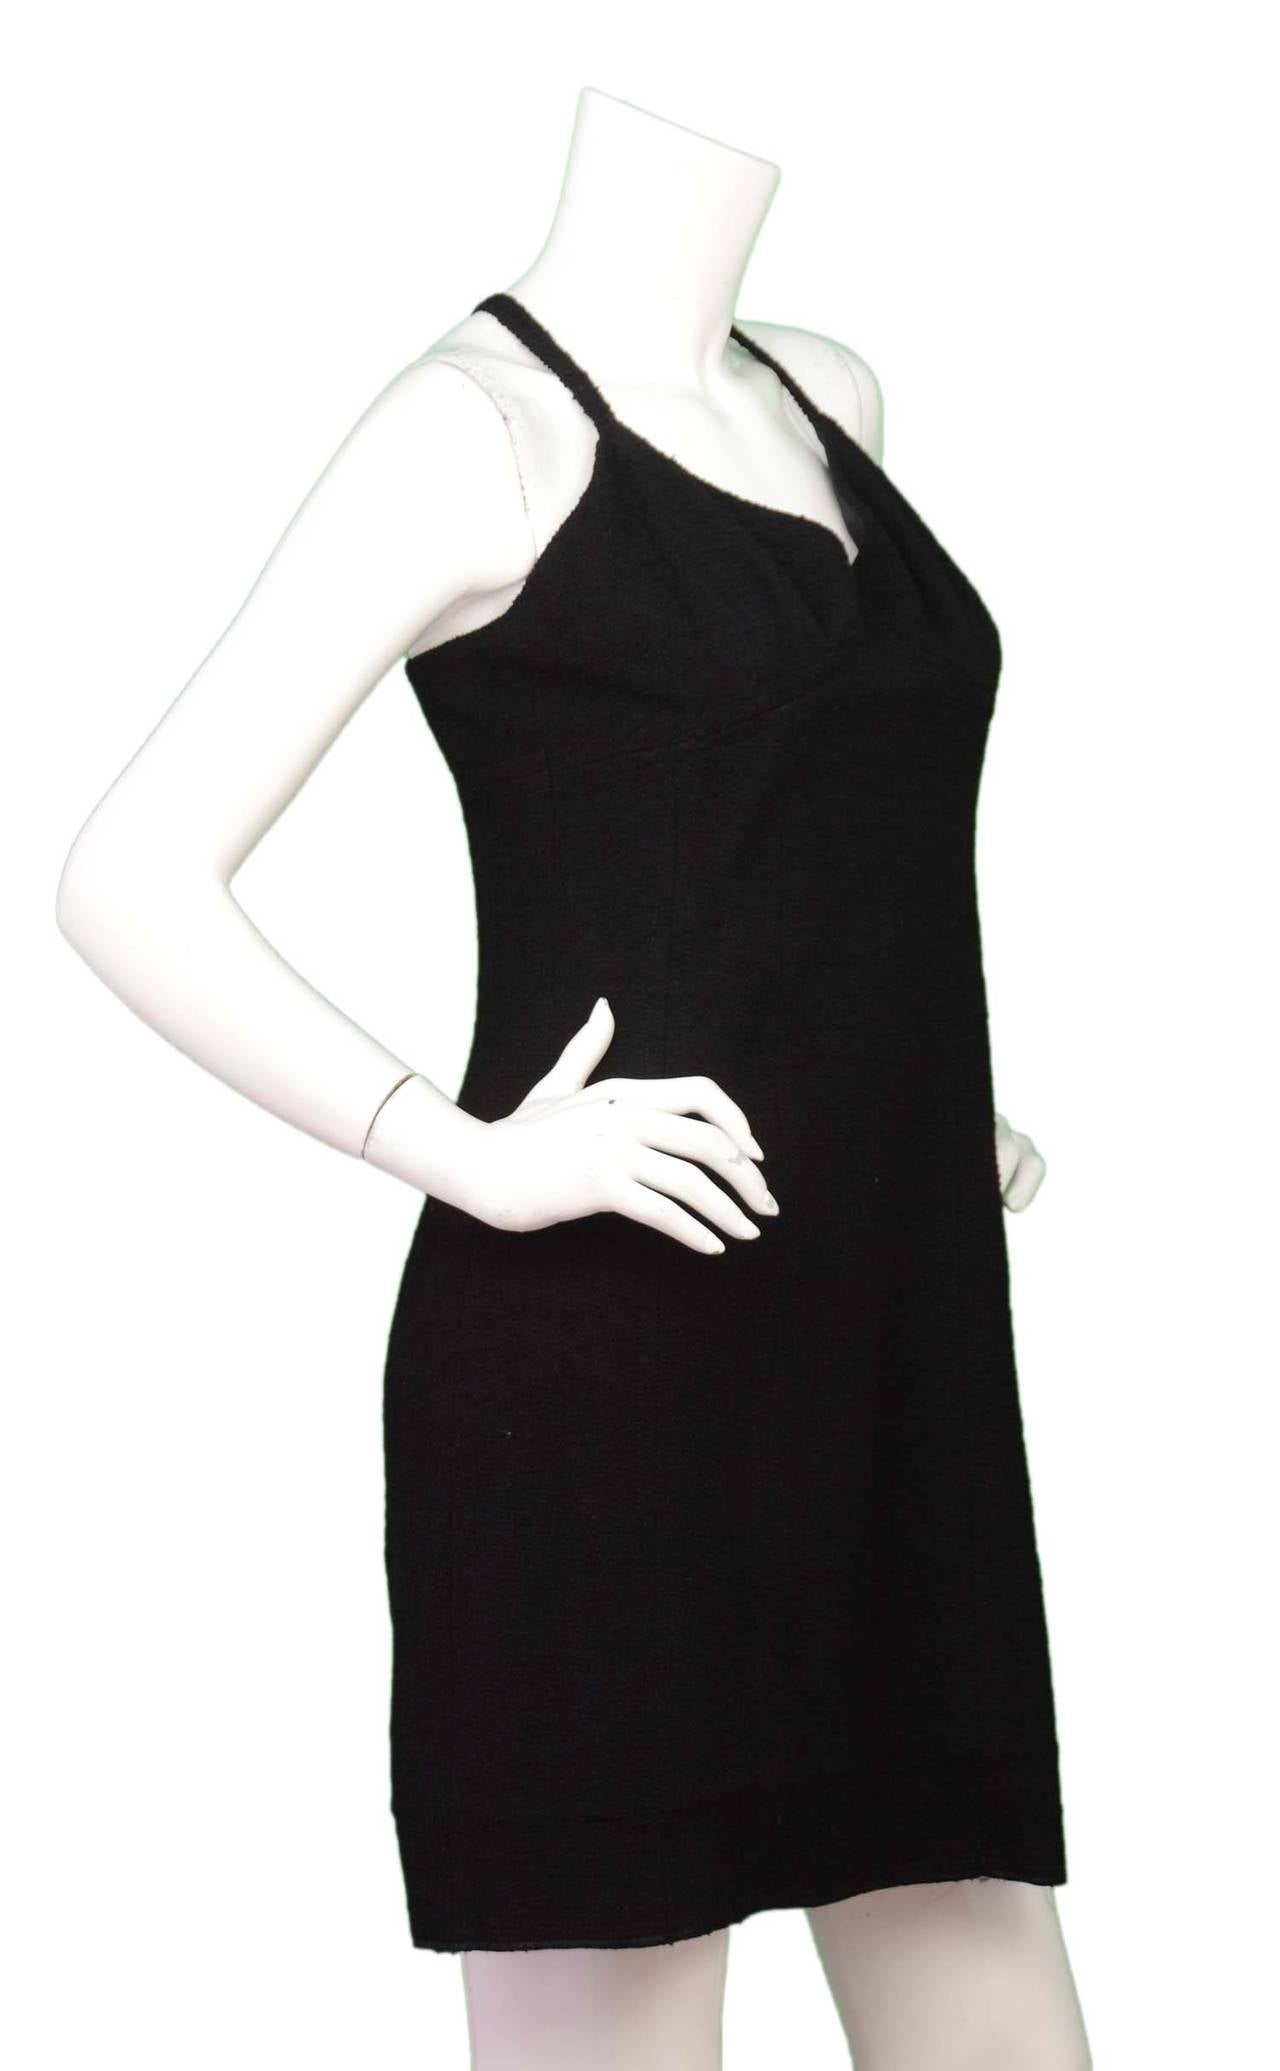 Chanel Vintage '94 Black Wool Spaghetti Strap Dress

    Made in: France
    Year of Production: 1994
    Color: Black
    Composition: 93% wool, 7% nylon
    Lining: Black, 100% silk
    Closure/opening: Back center zipper
    Exterior